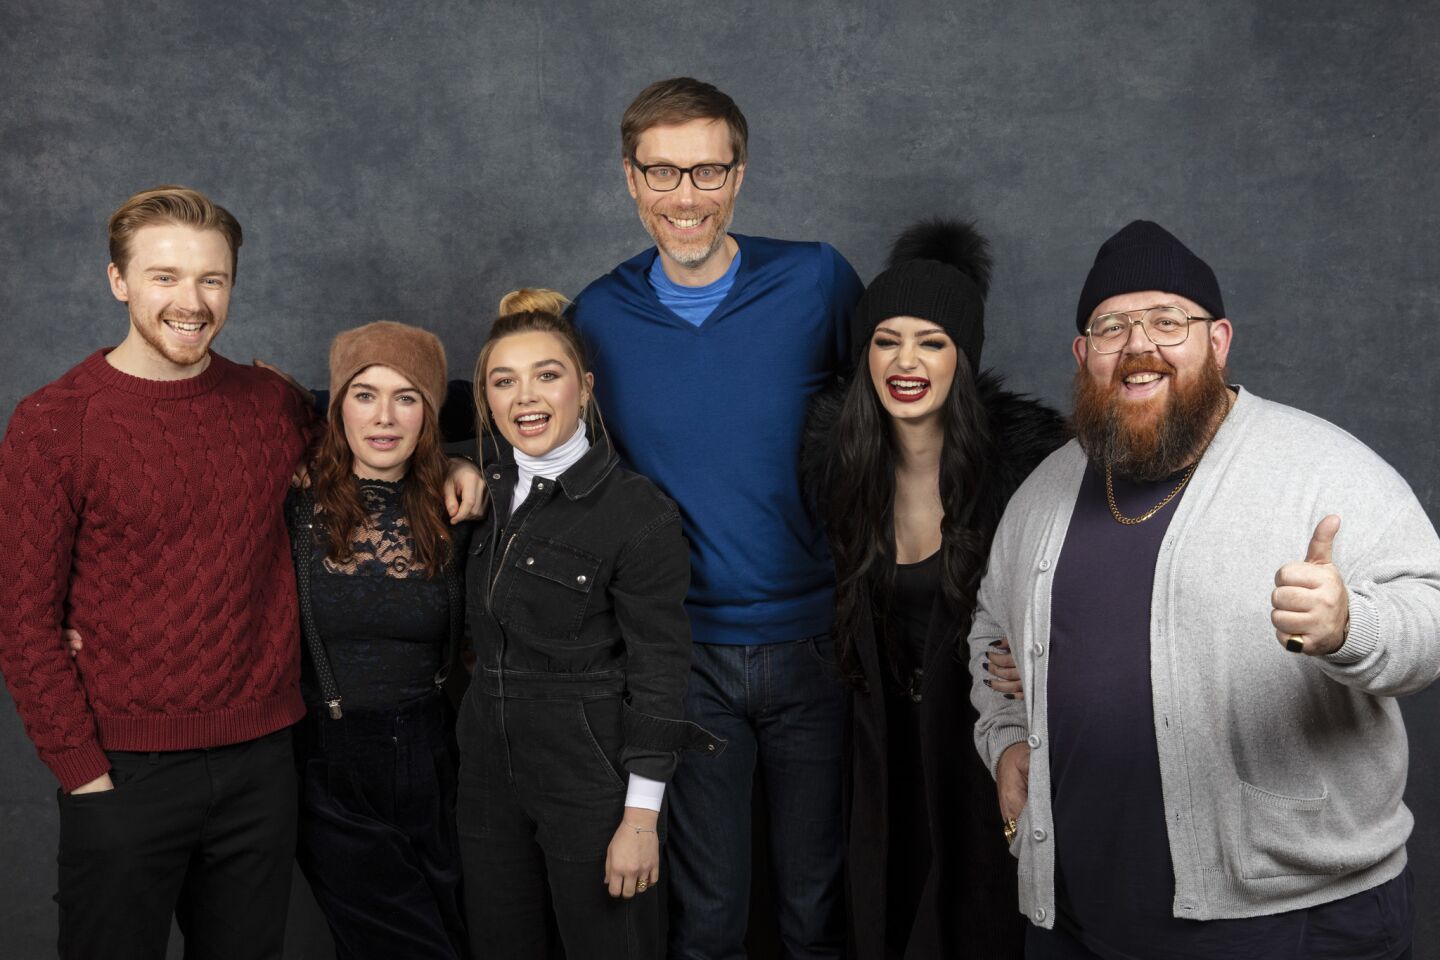 Actors Jack Lowden, left, Lena Headey and Florence Pugh, director-writer-actor Stephen Merchant, WWE Superstar Paige and actor Nick Frost from the film "Fighting with My Family."